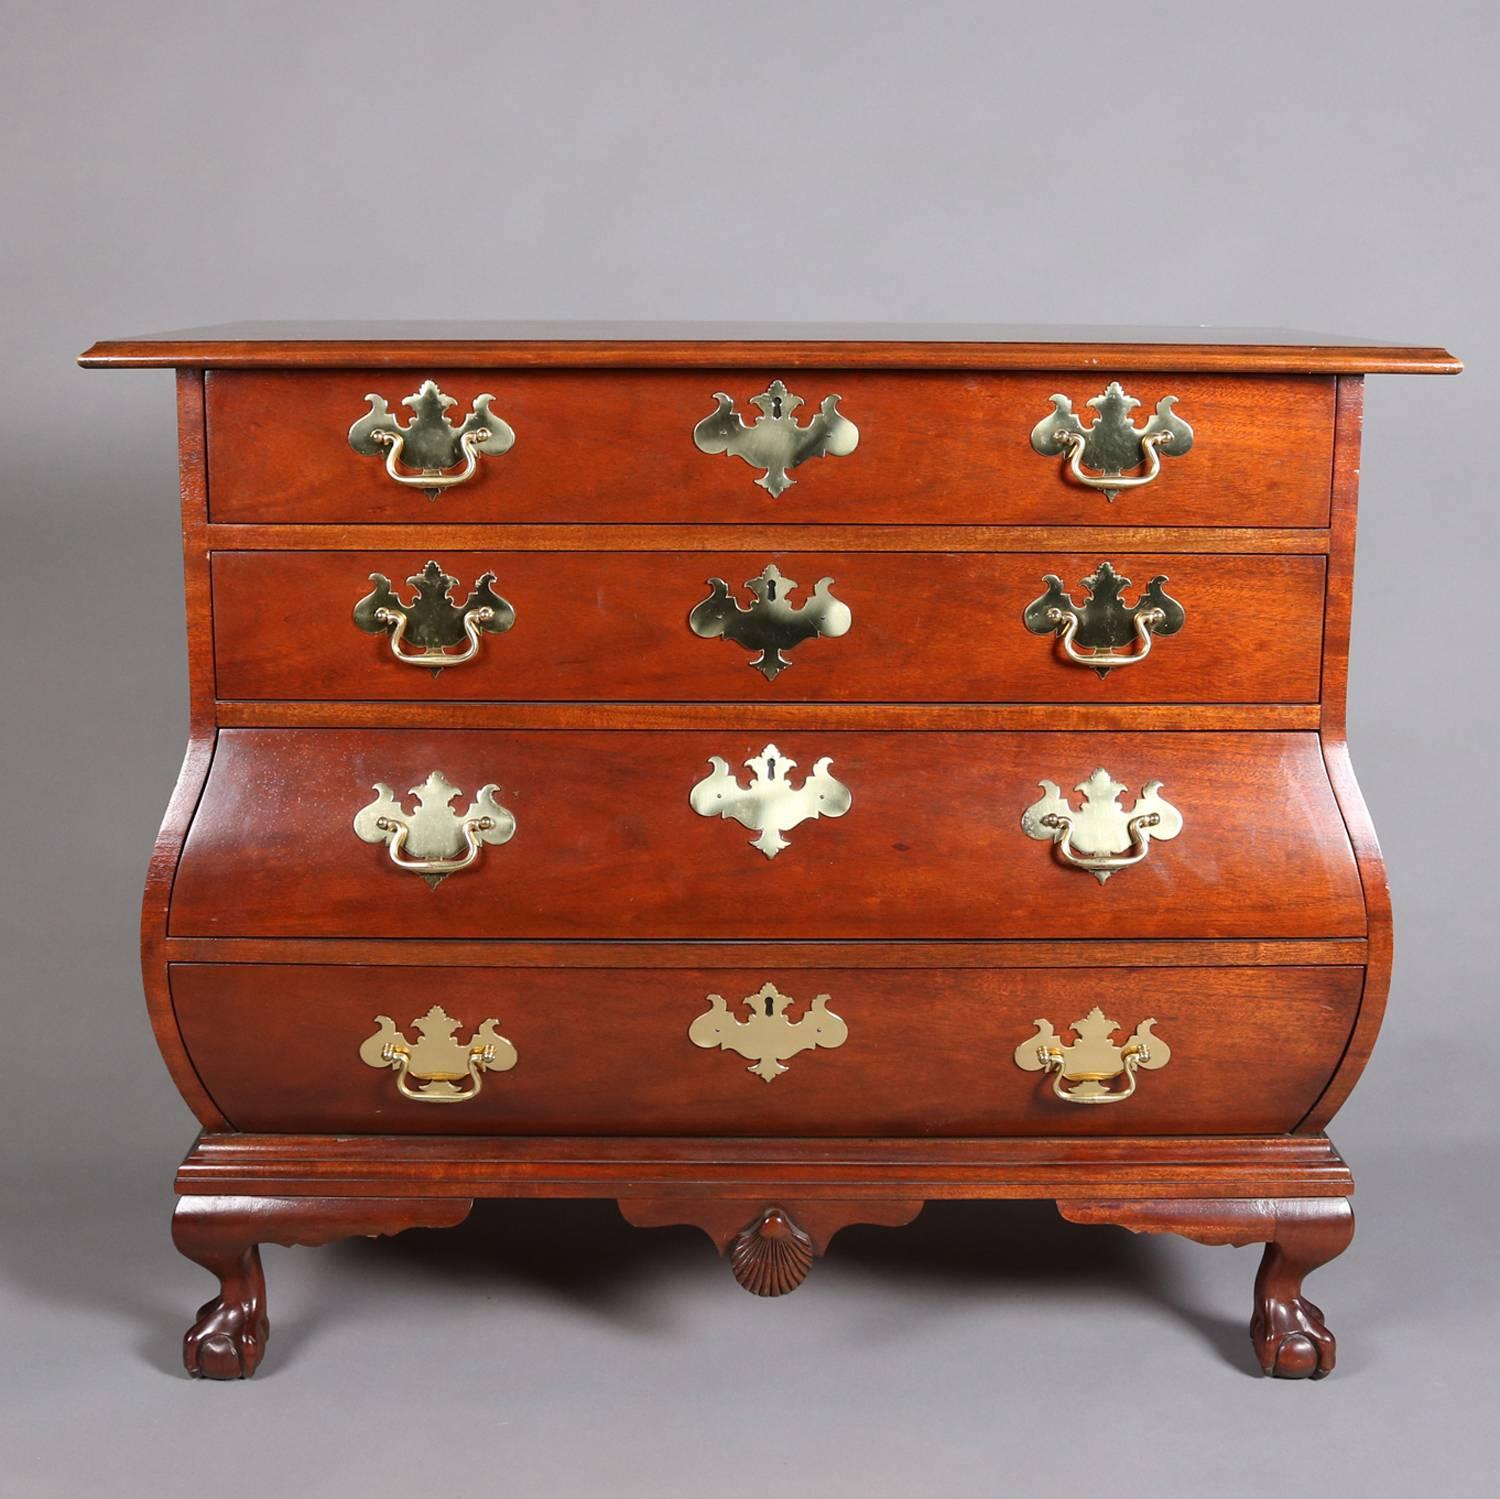 American Baker Furniture Historic Charleston Chippendale Mahogany Ball & Claw Bombe Chest